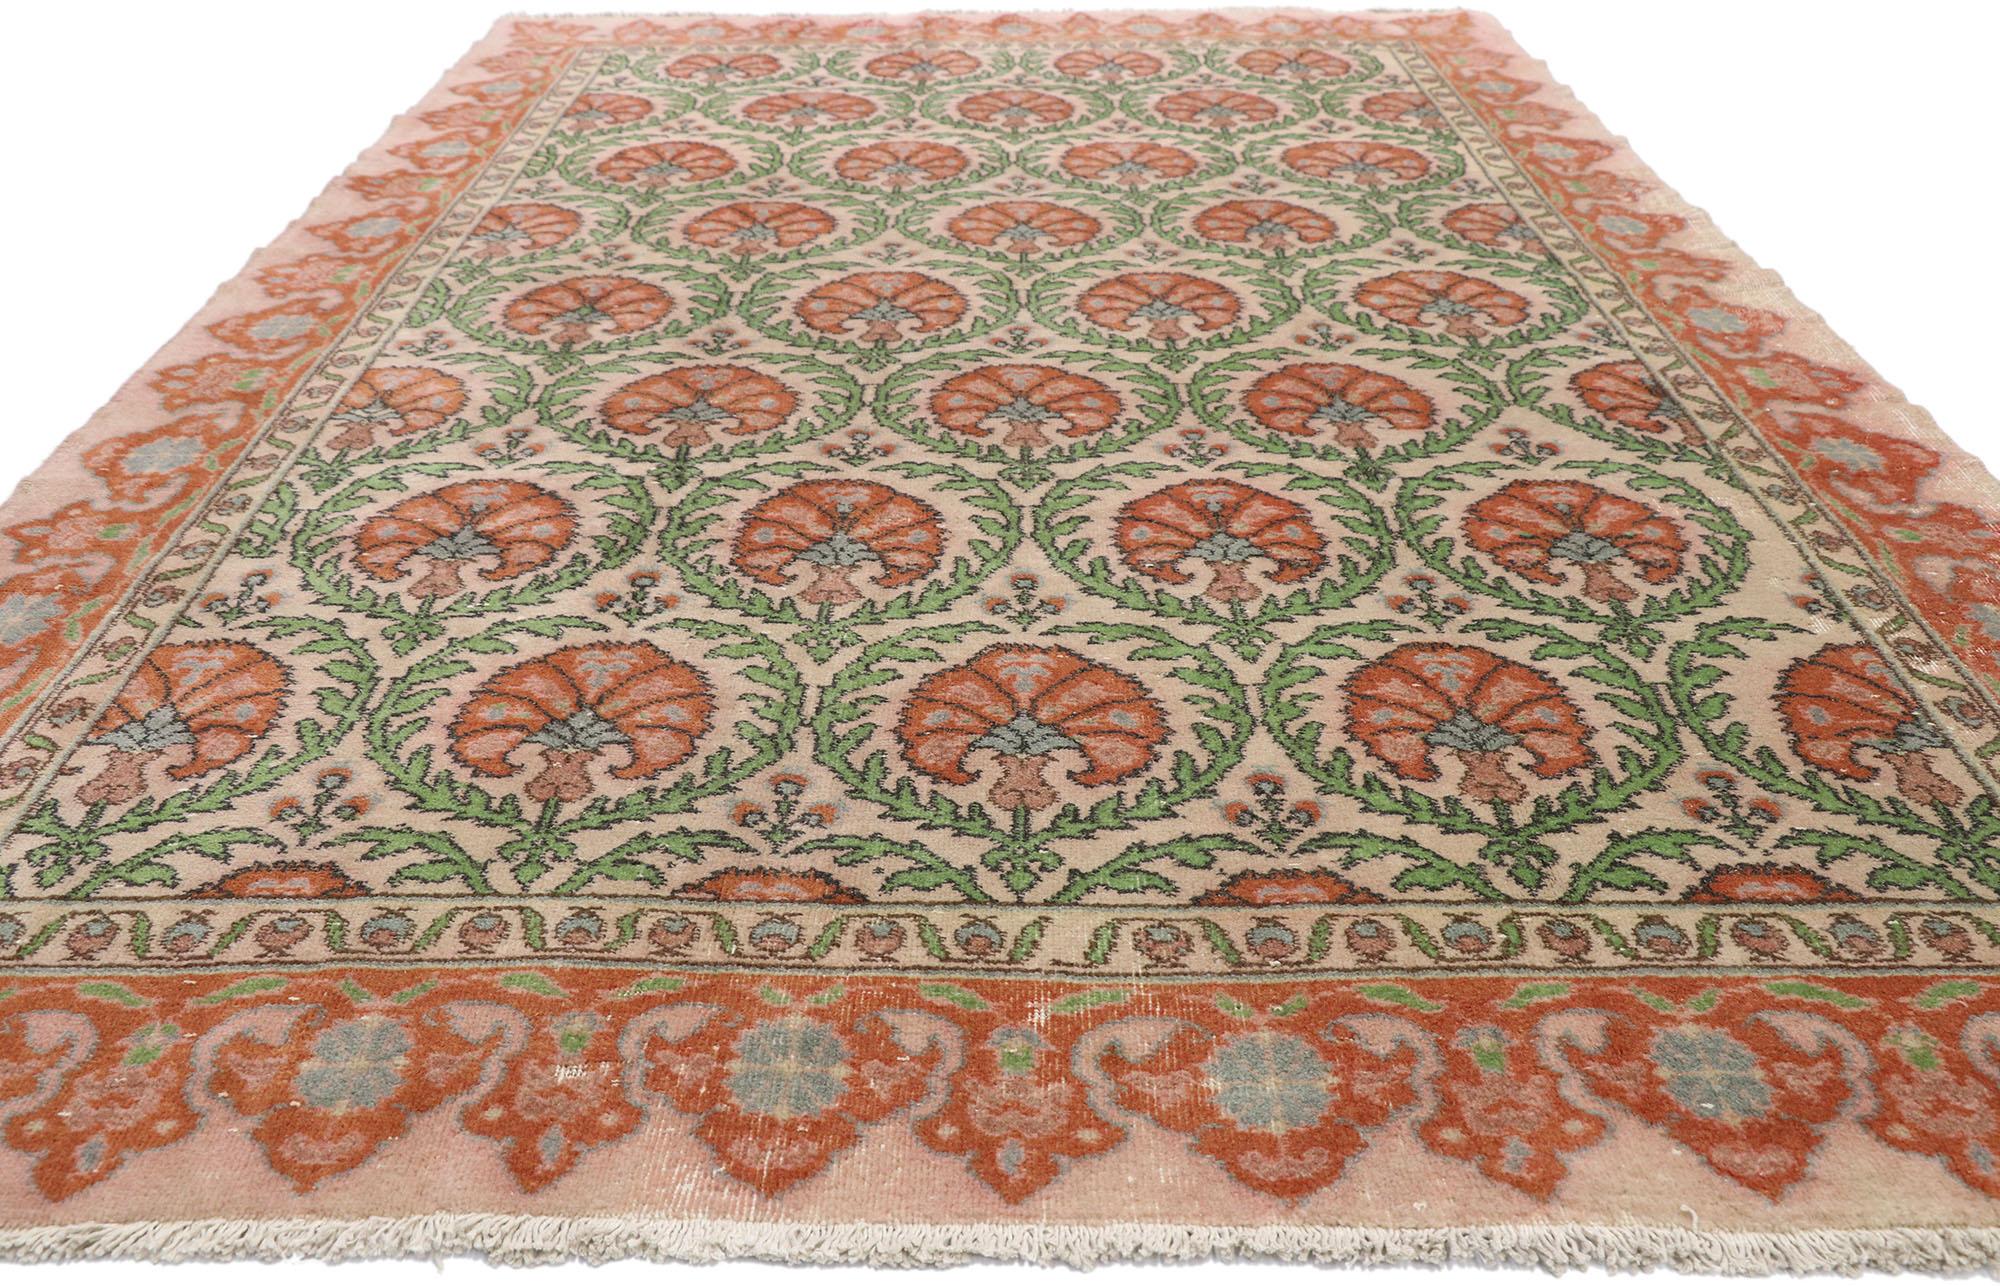 Arts and Crafts Distressed Vintage Turkish Sivas Rug with Arts & Crafts William Morris Style